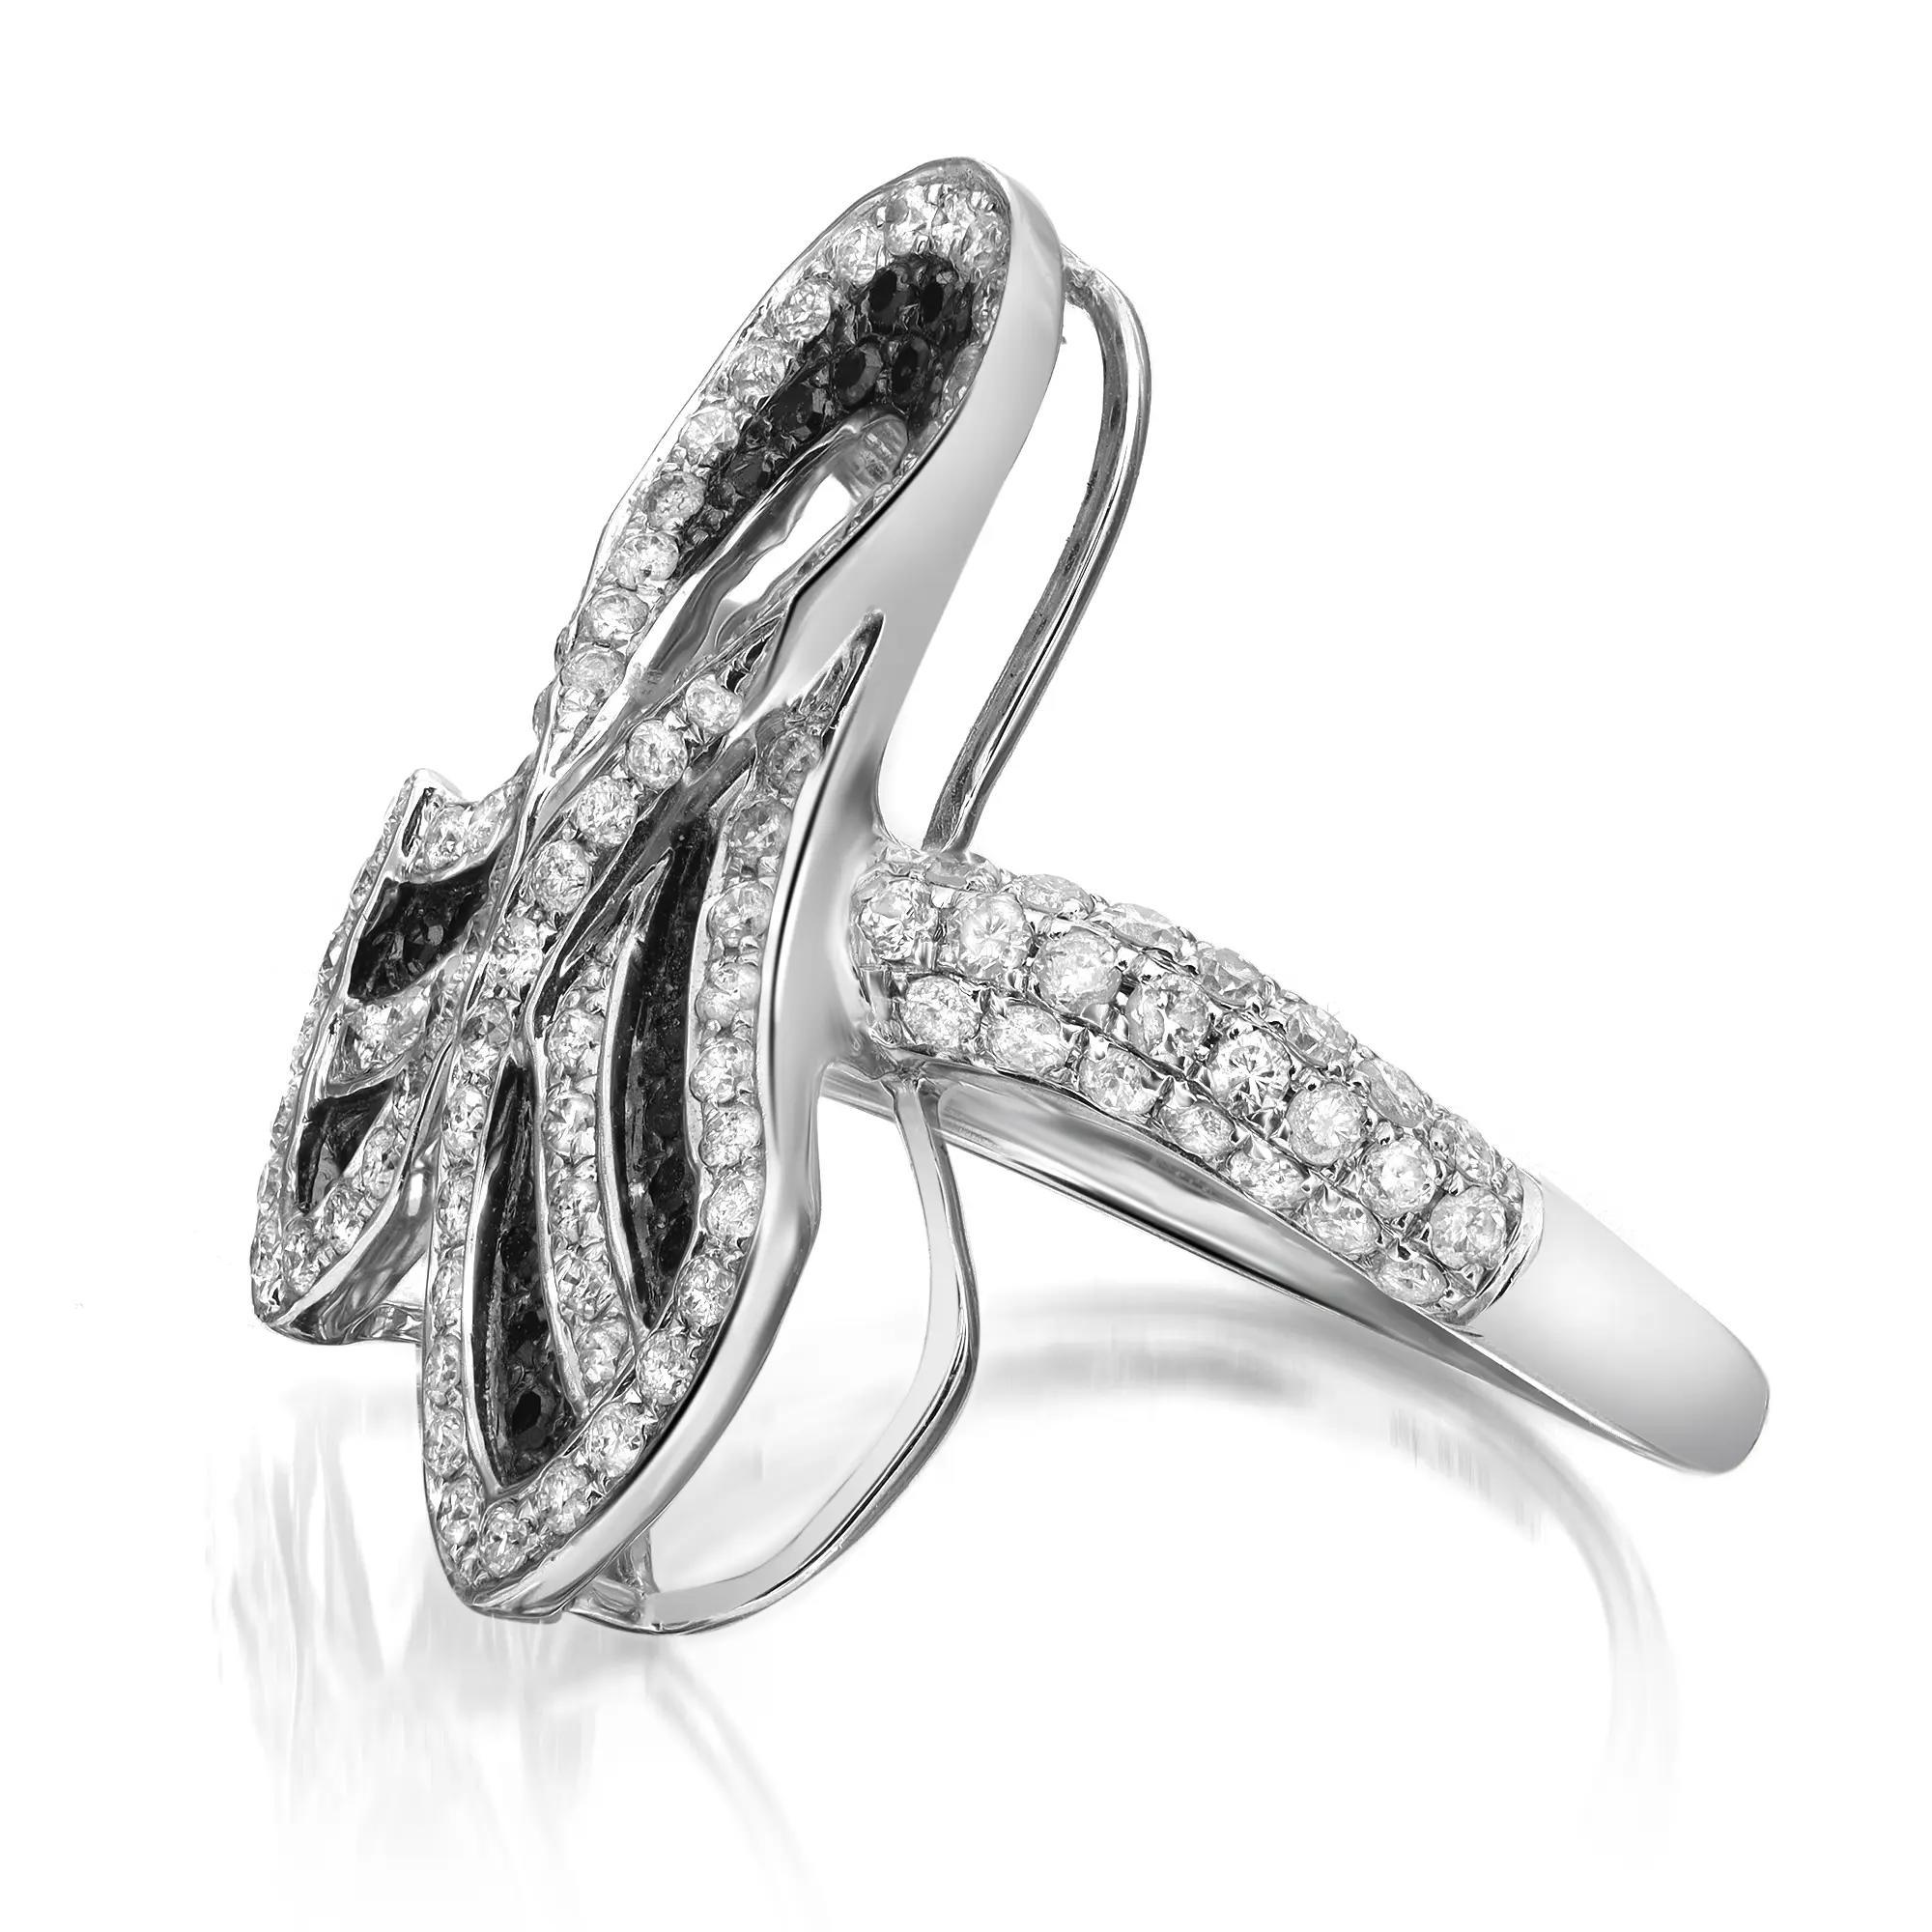 Taille ronde 1.16Cttw White and Black Diamond Ladies Cocktail Ring 14K White Gold Size 7.5  en vente